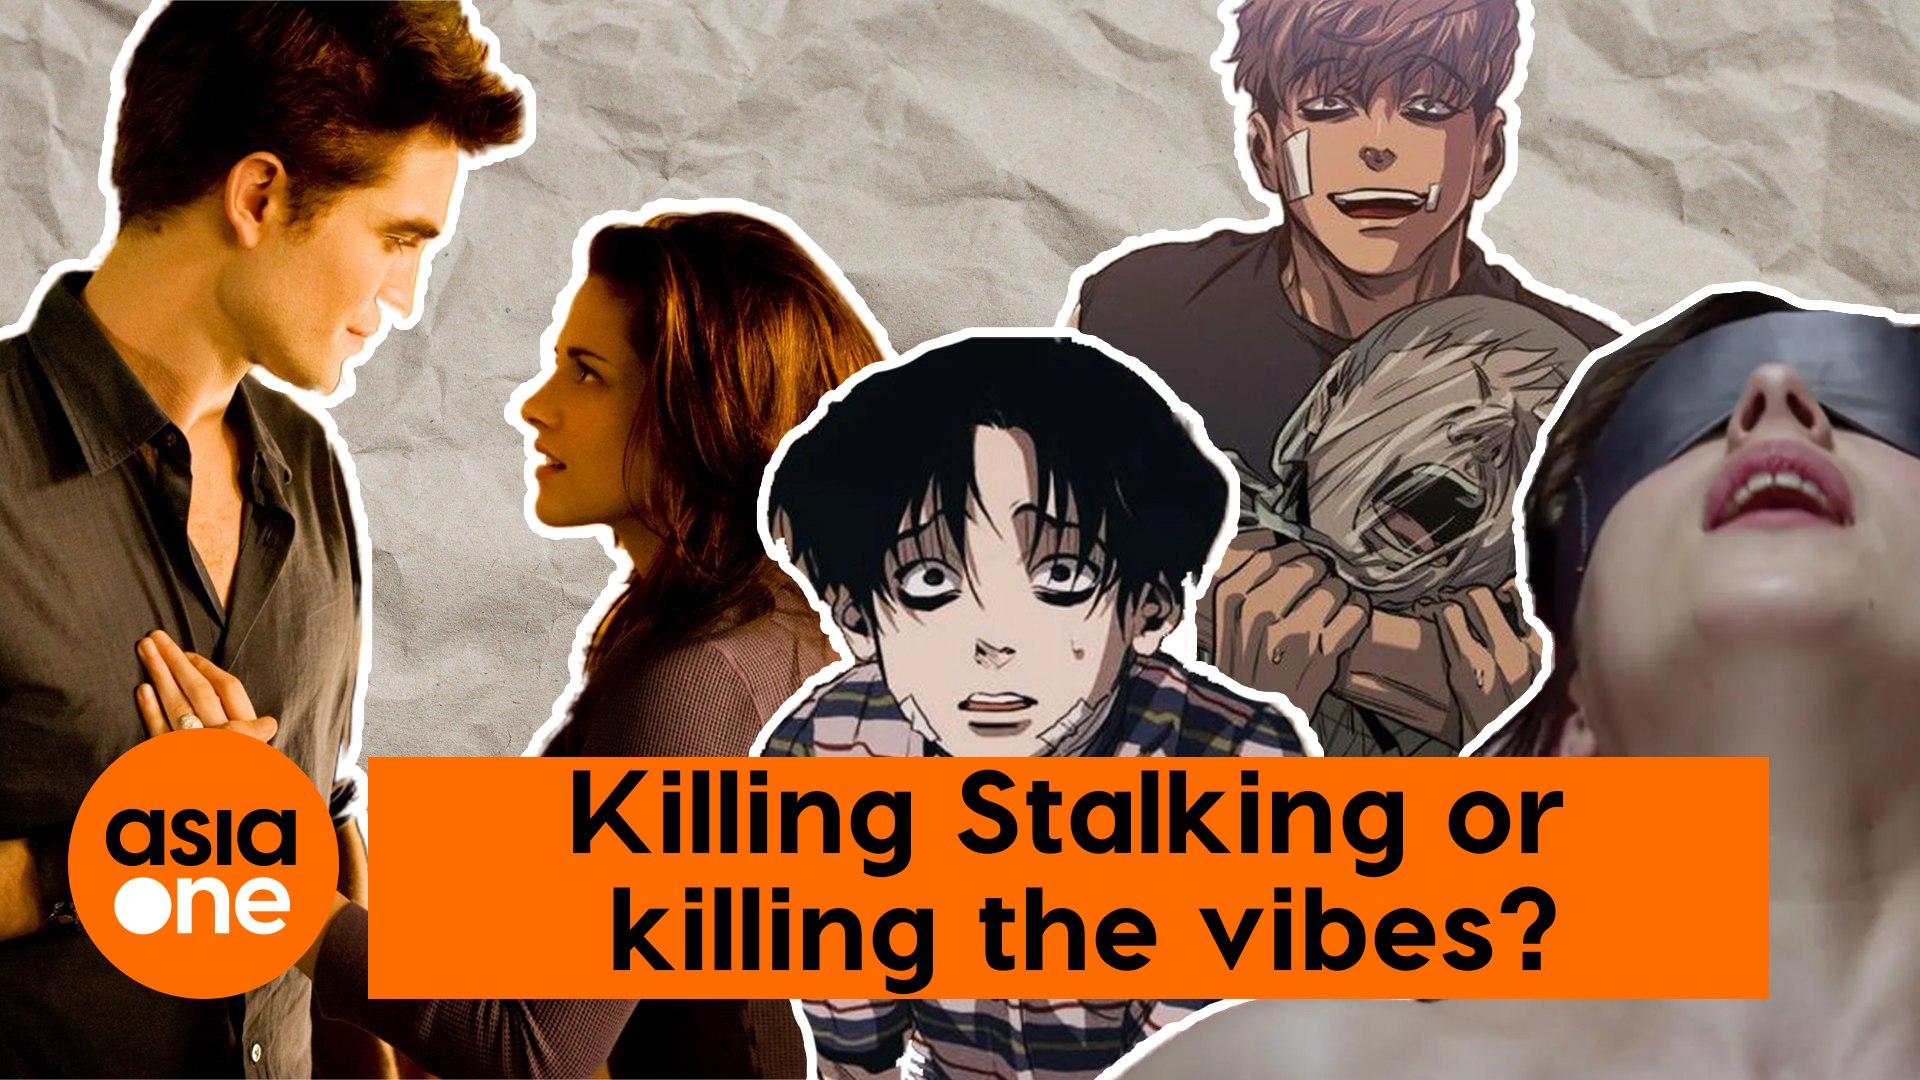 TLDR: Why are the toxic, abusive characters in Killing Stalking so popular?  - video Dailymotion